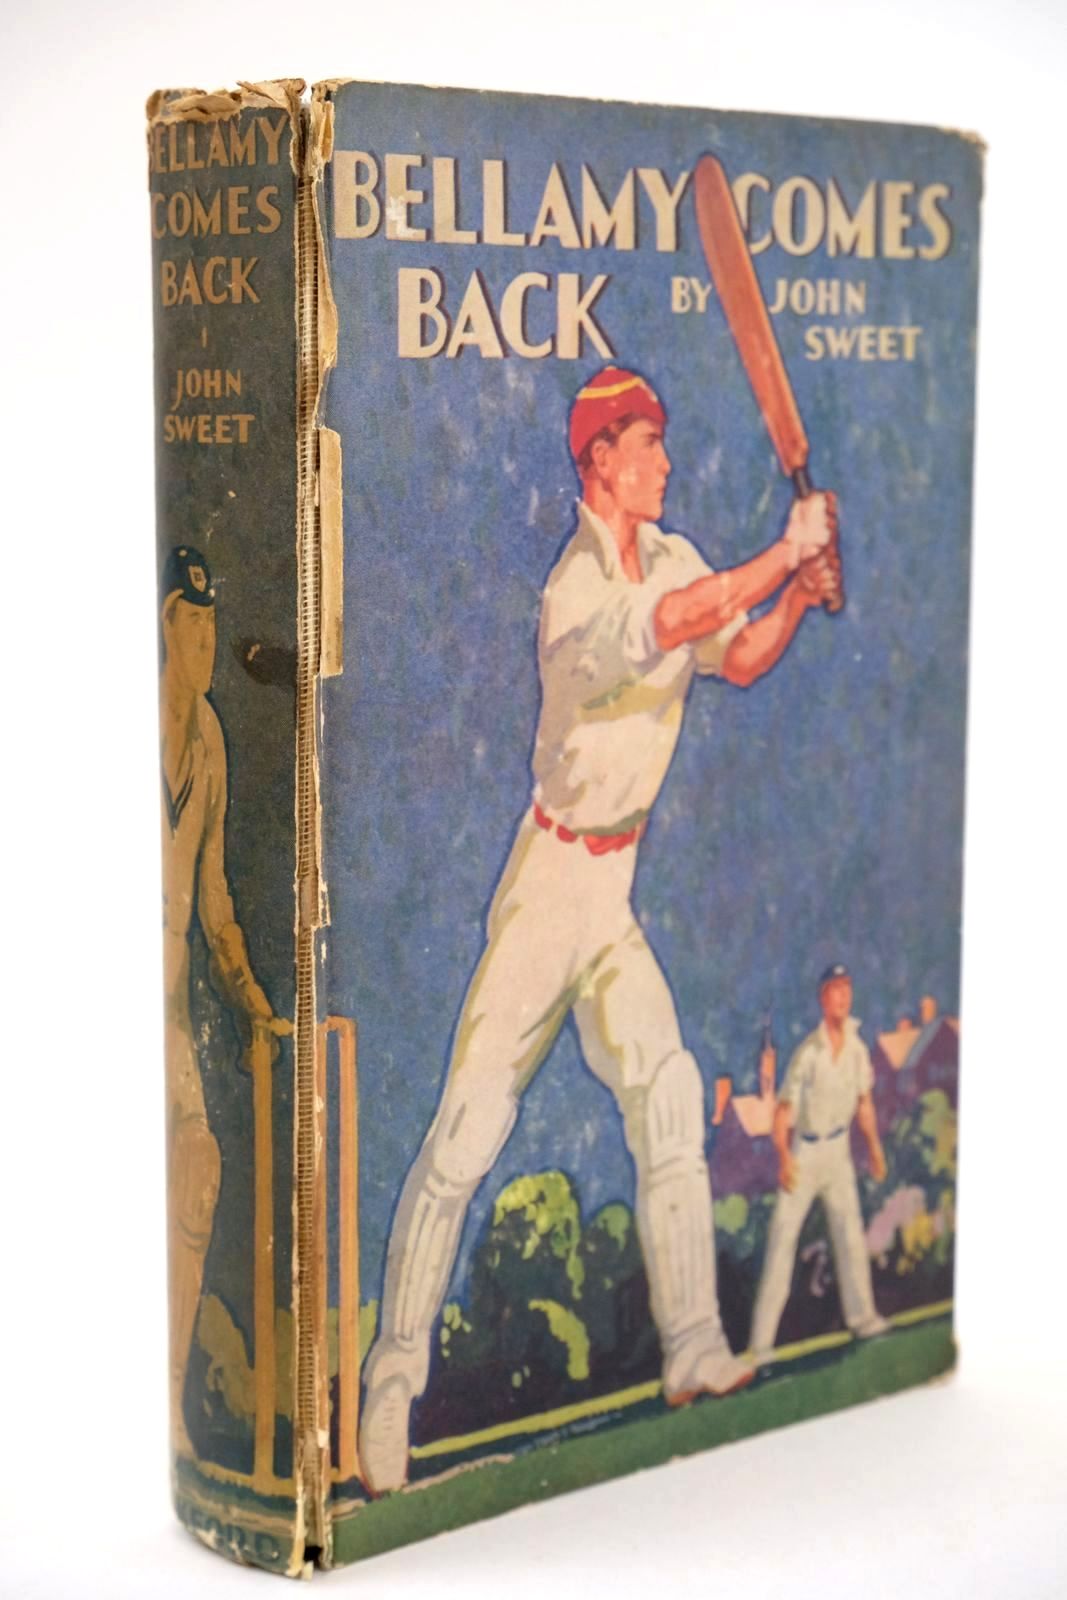 Photo of BELLAMY COMES BACK written by Sweet, John published by Oxford University Press, Humphrey Milford (STOCK CODE: 1325219)  for sale by Stella & Rose's Books